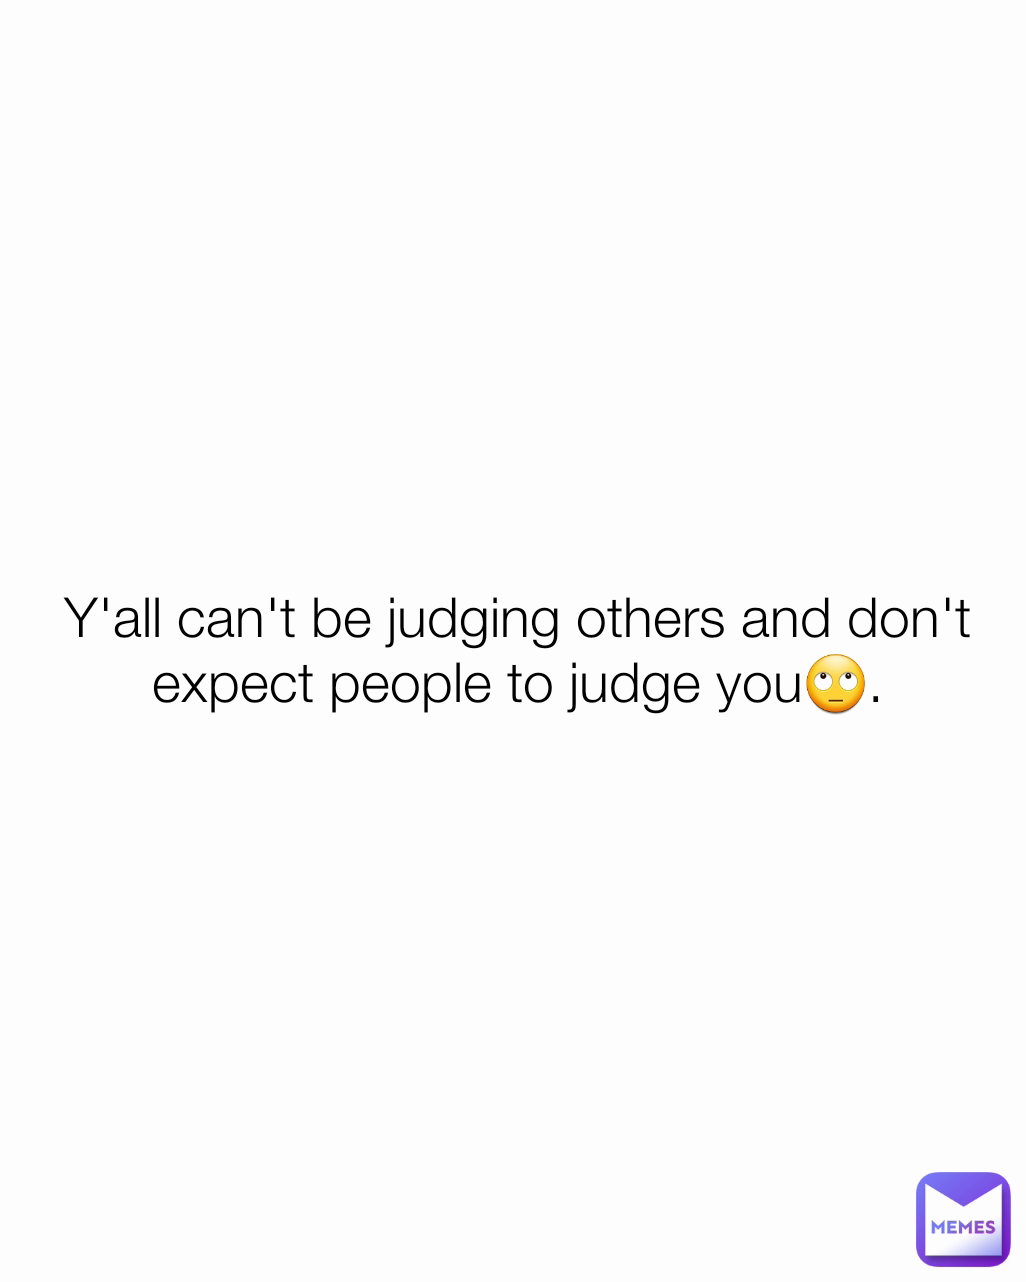 Y'all can't be judging others and don't expect people to judge you🙄.